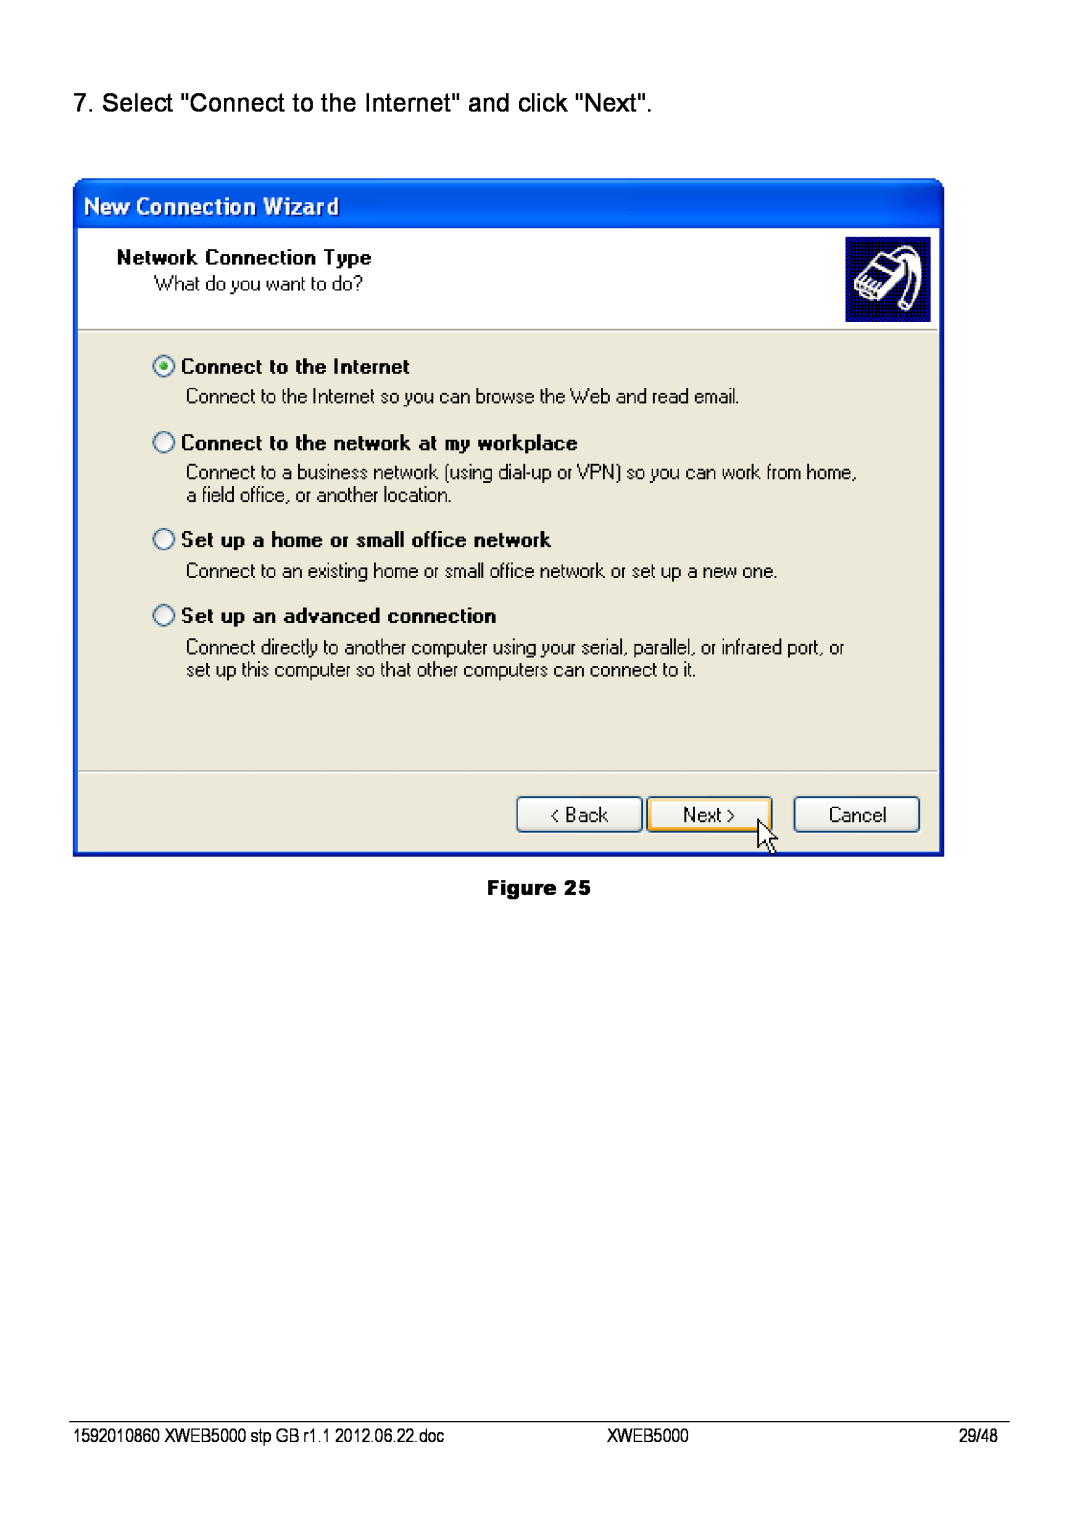 Emerson manual Select Connect to the Internet and click Next, Figure, XWEB5000 stp GB r1.1 2012.06.22.doc, 29/48 